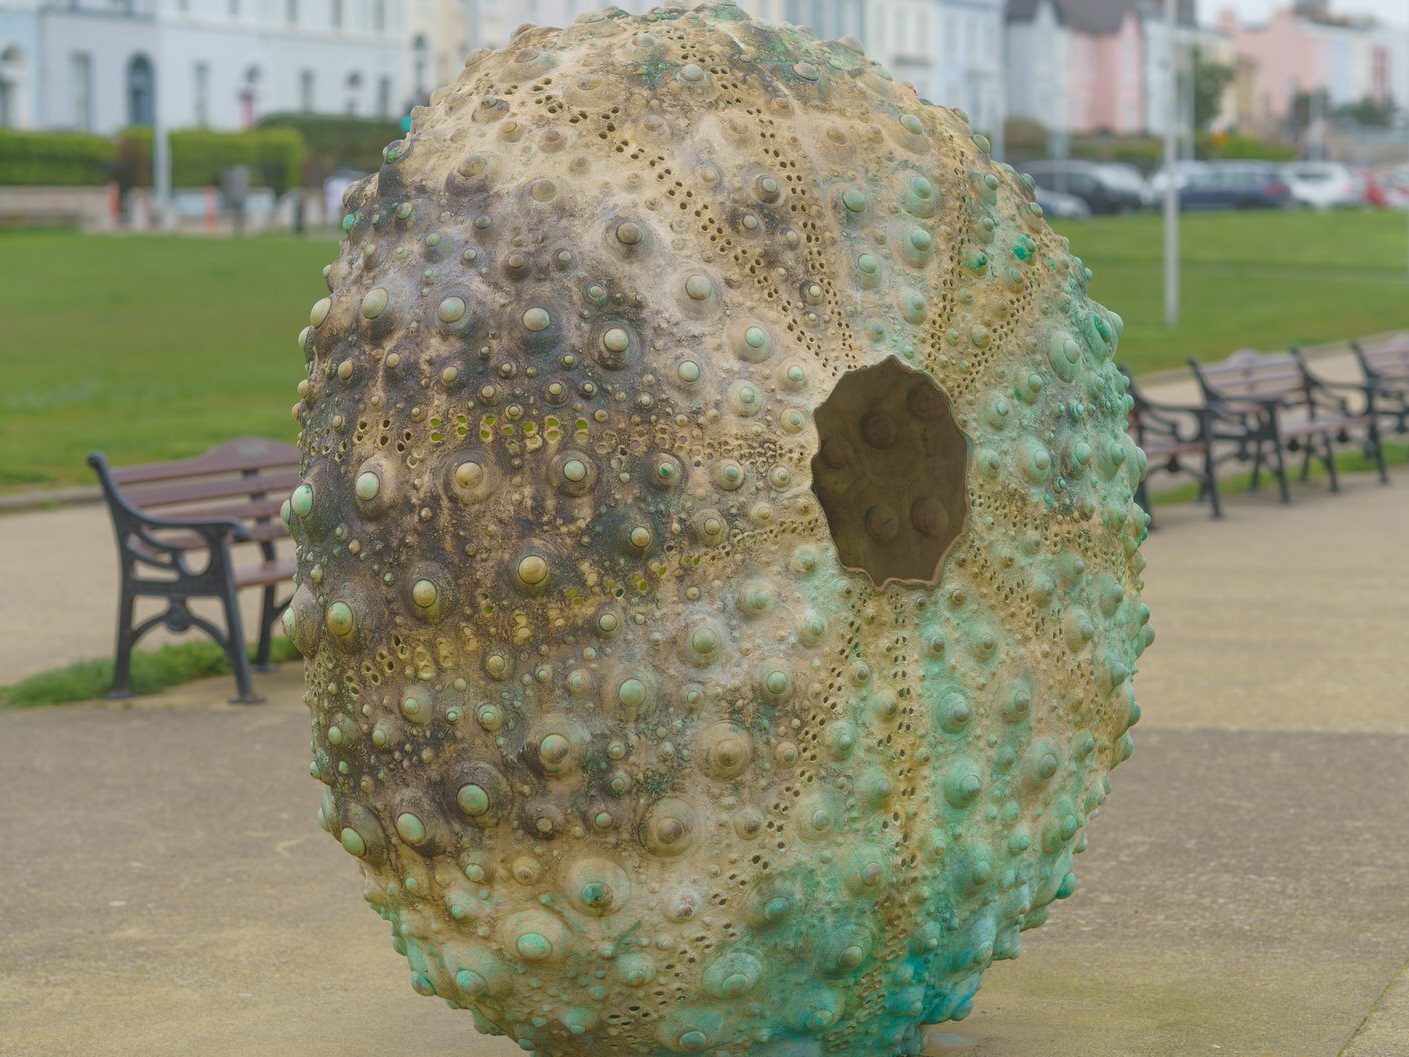 I REALLY LIKE THIS SCULPTURE BY RACHEL JOTNT [NEWTOWNSMITH IN SANDYCOVE] 004